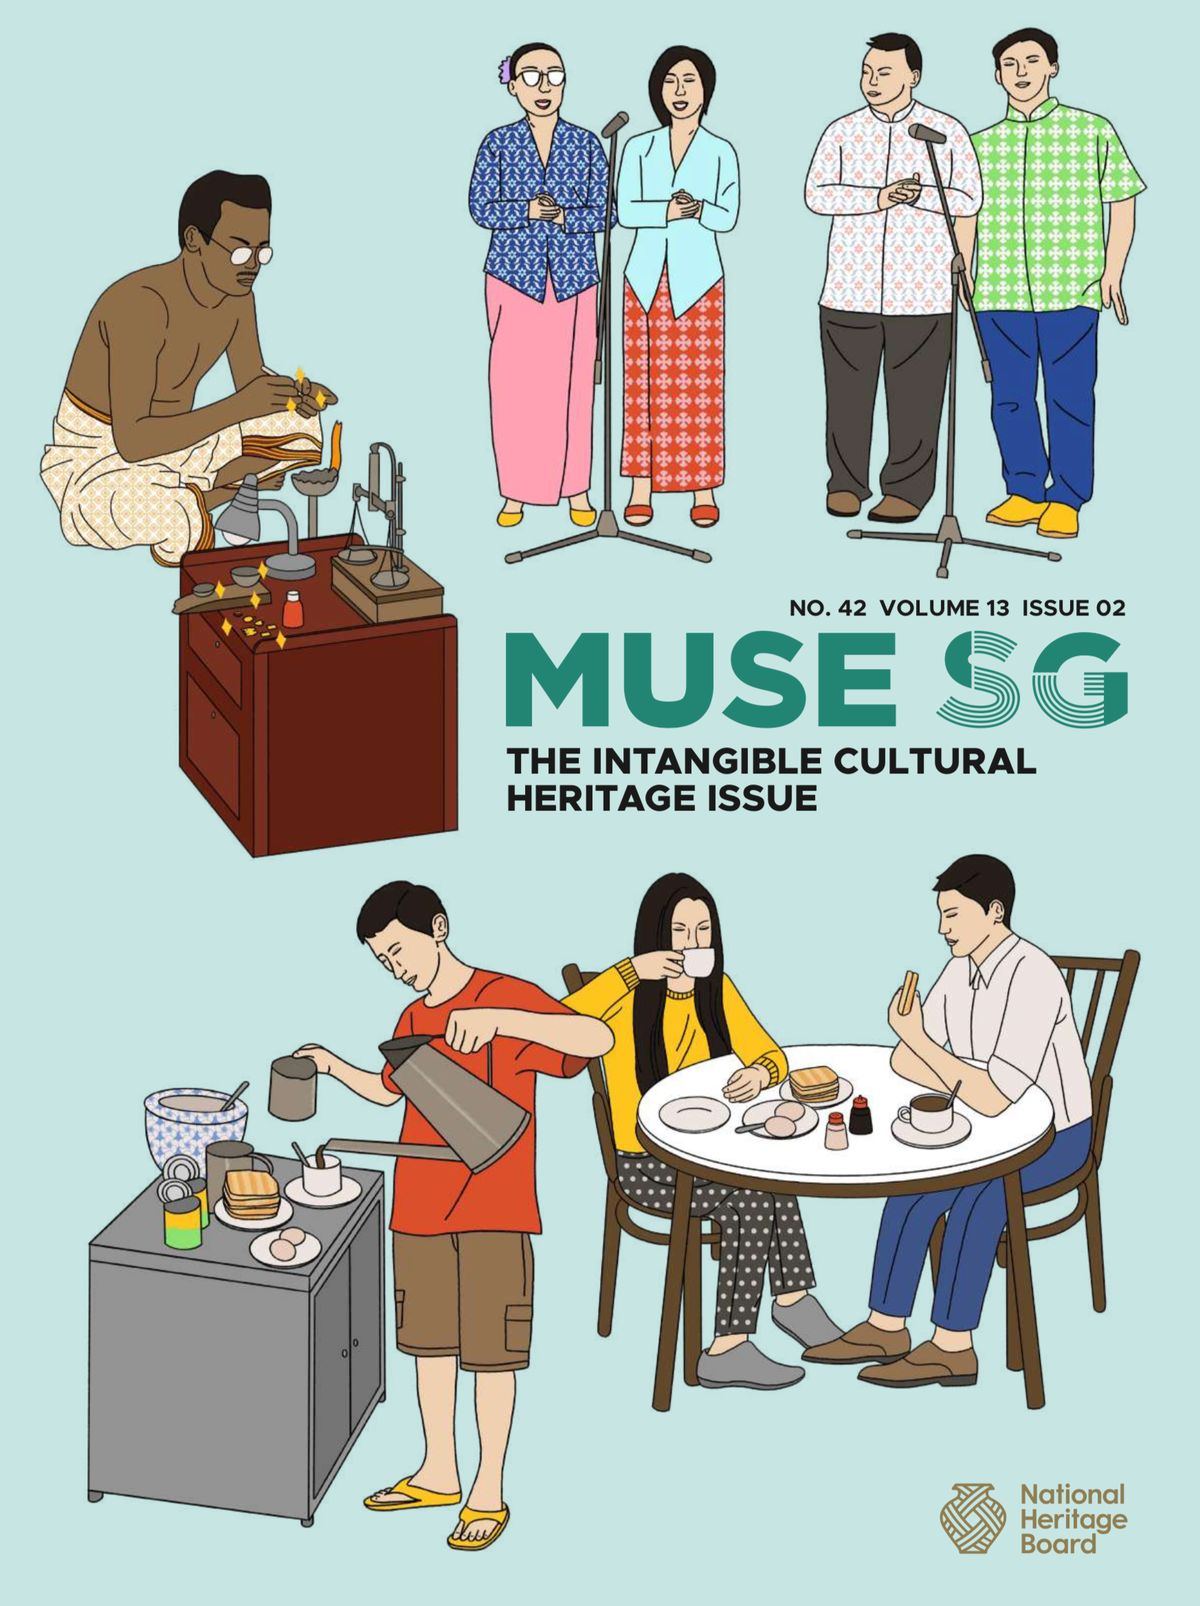 MUSE SG Volume 13 Issue 02 cover